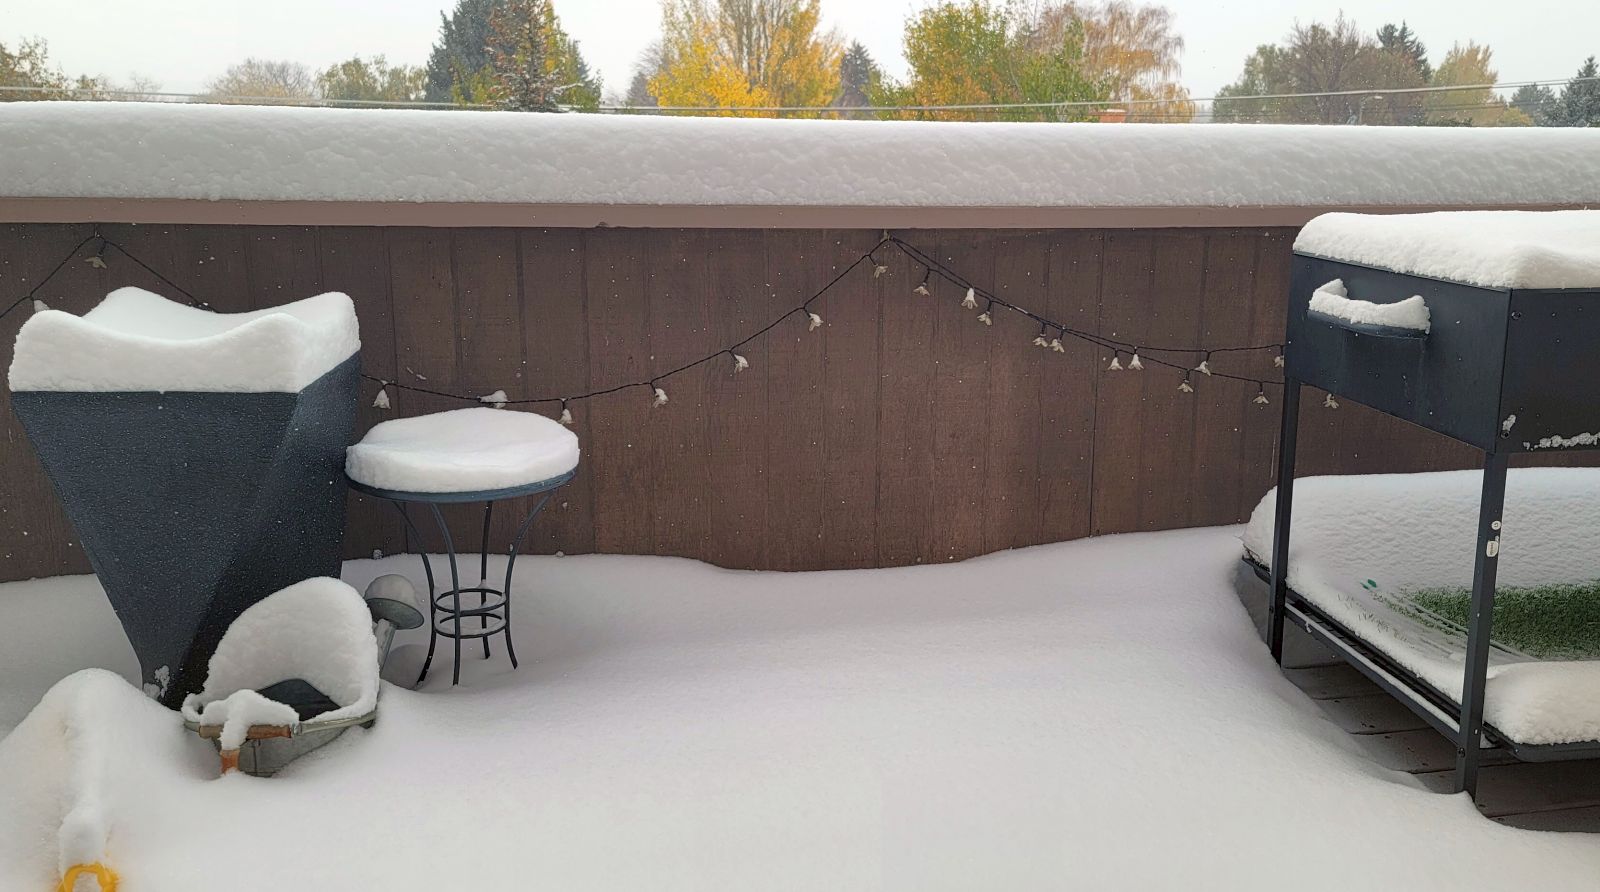 Snow in Great Falls on October 25, 2023